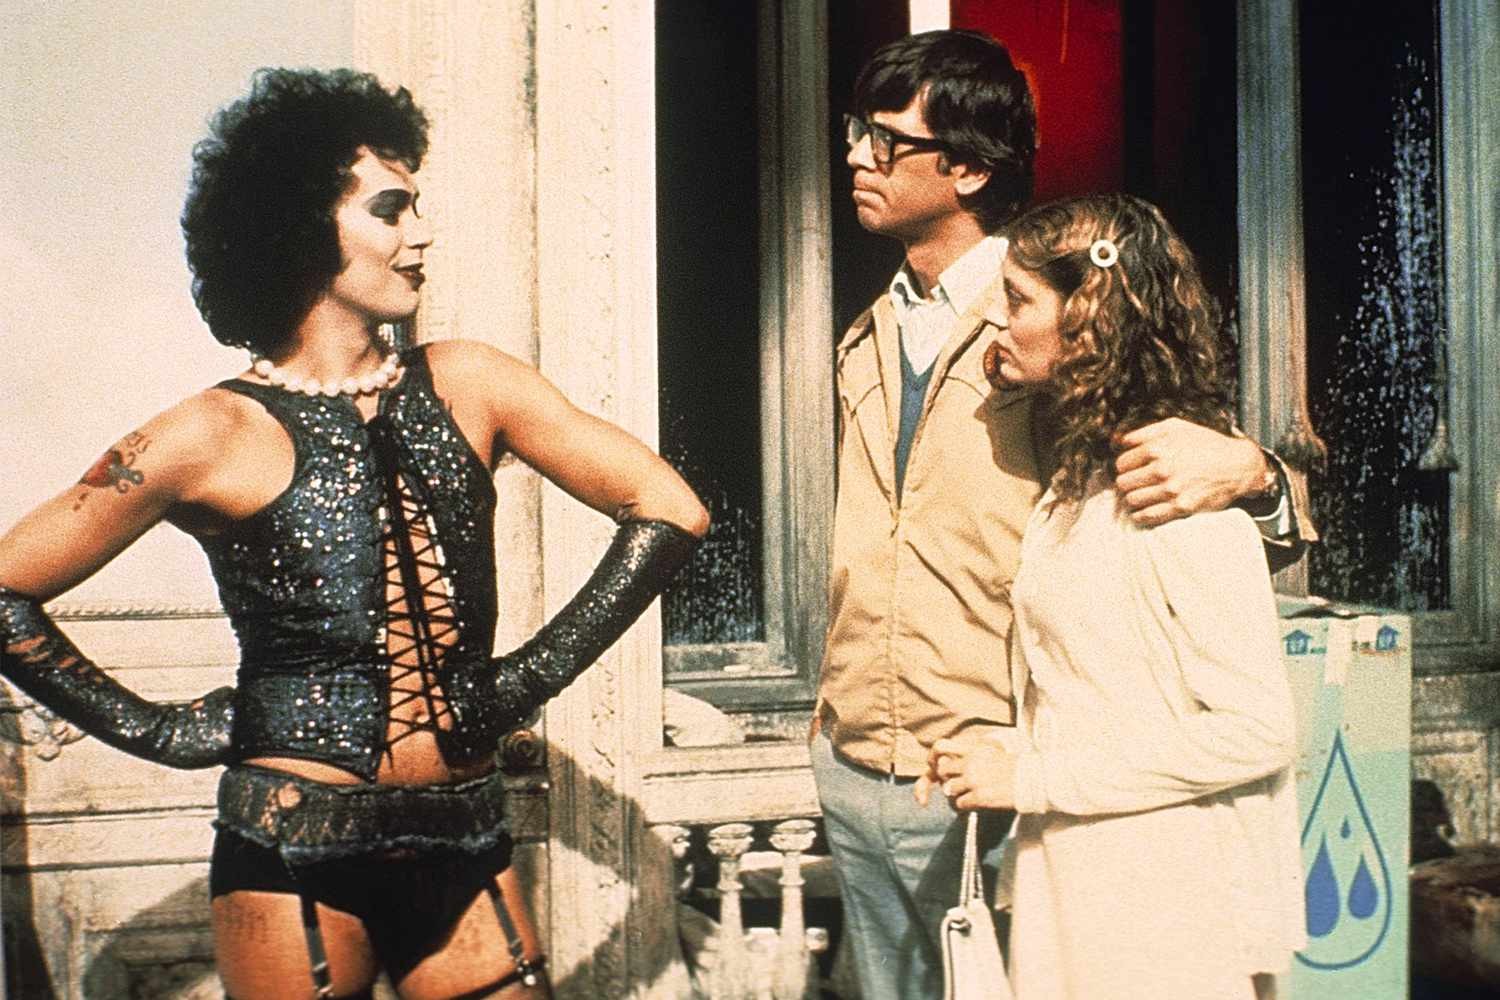 THE ROCKY HORROR PICTURE SHOW (1975) 